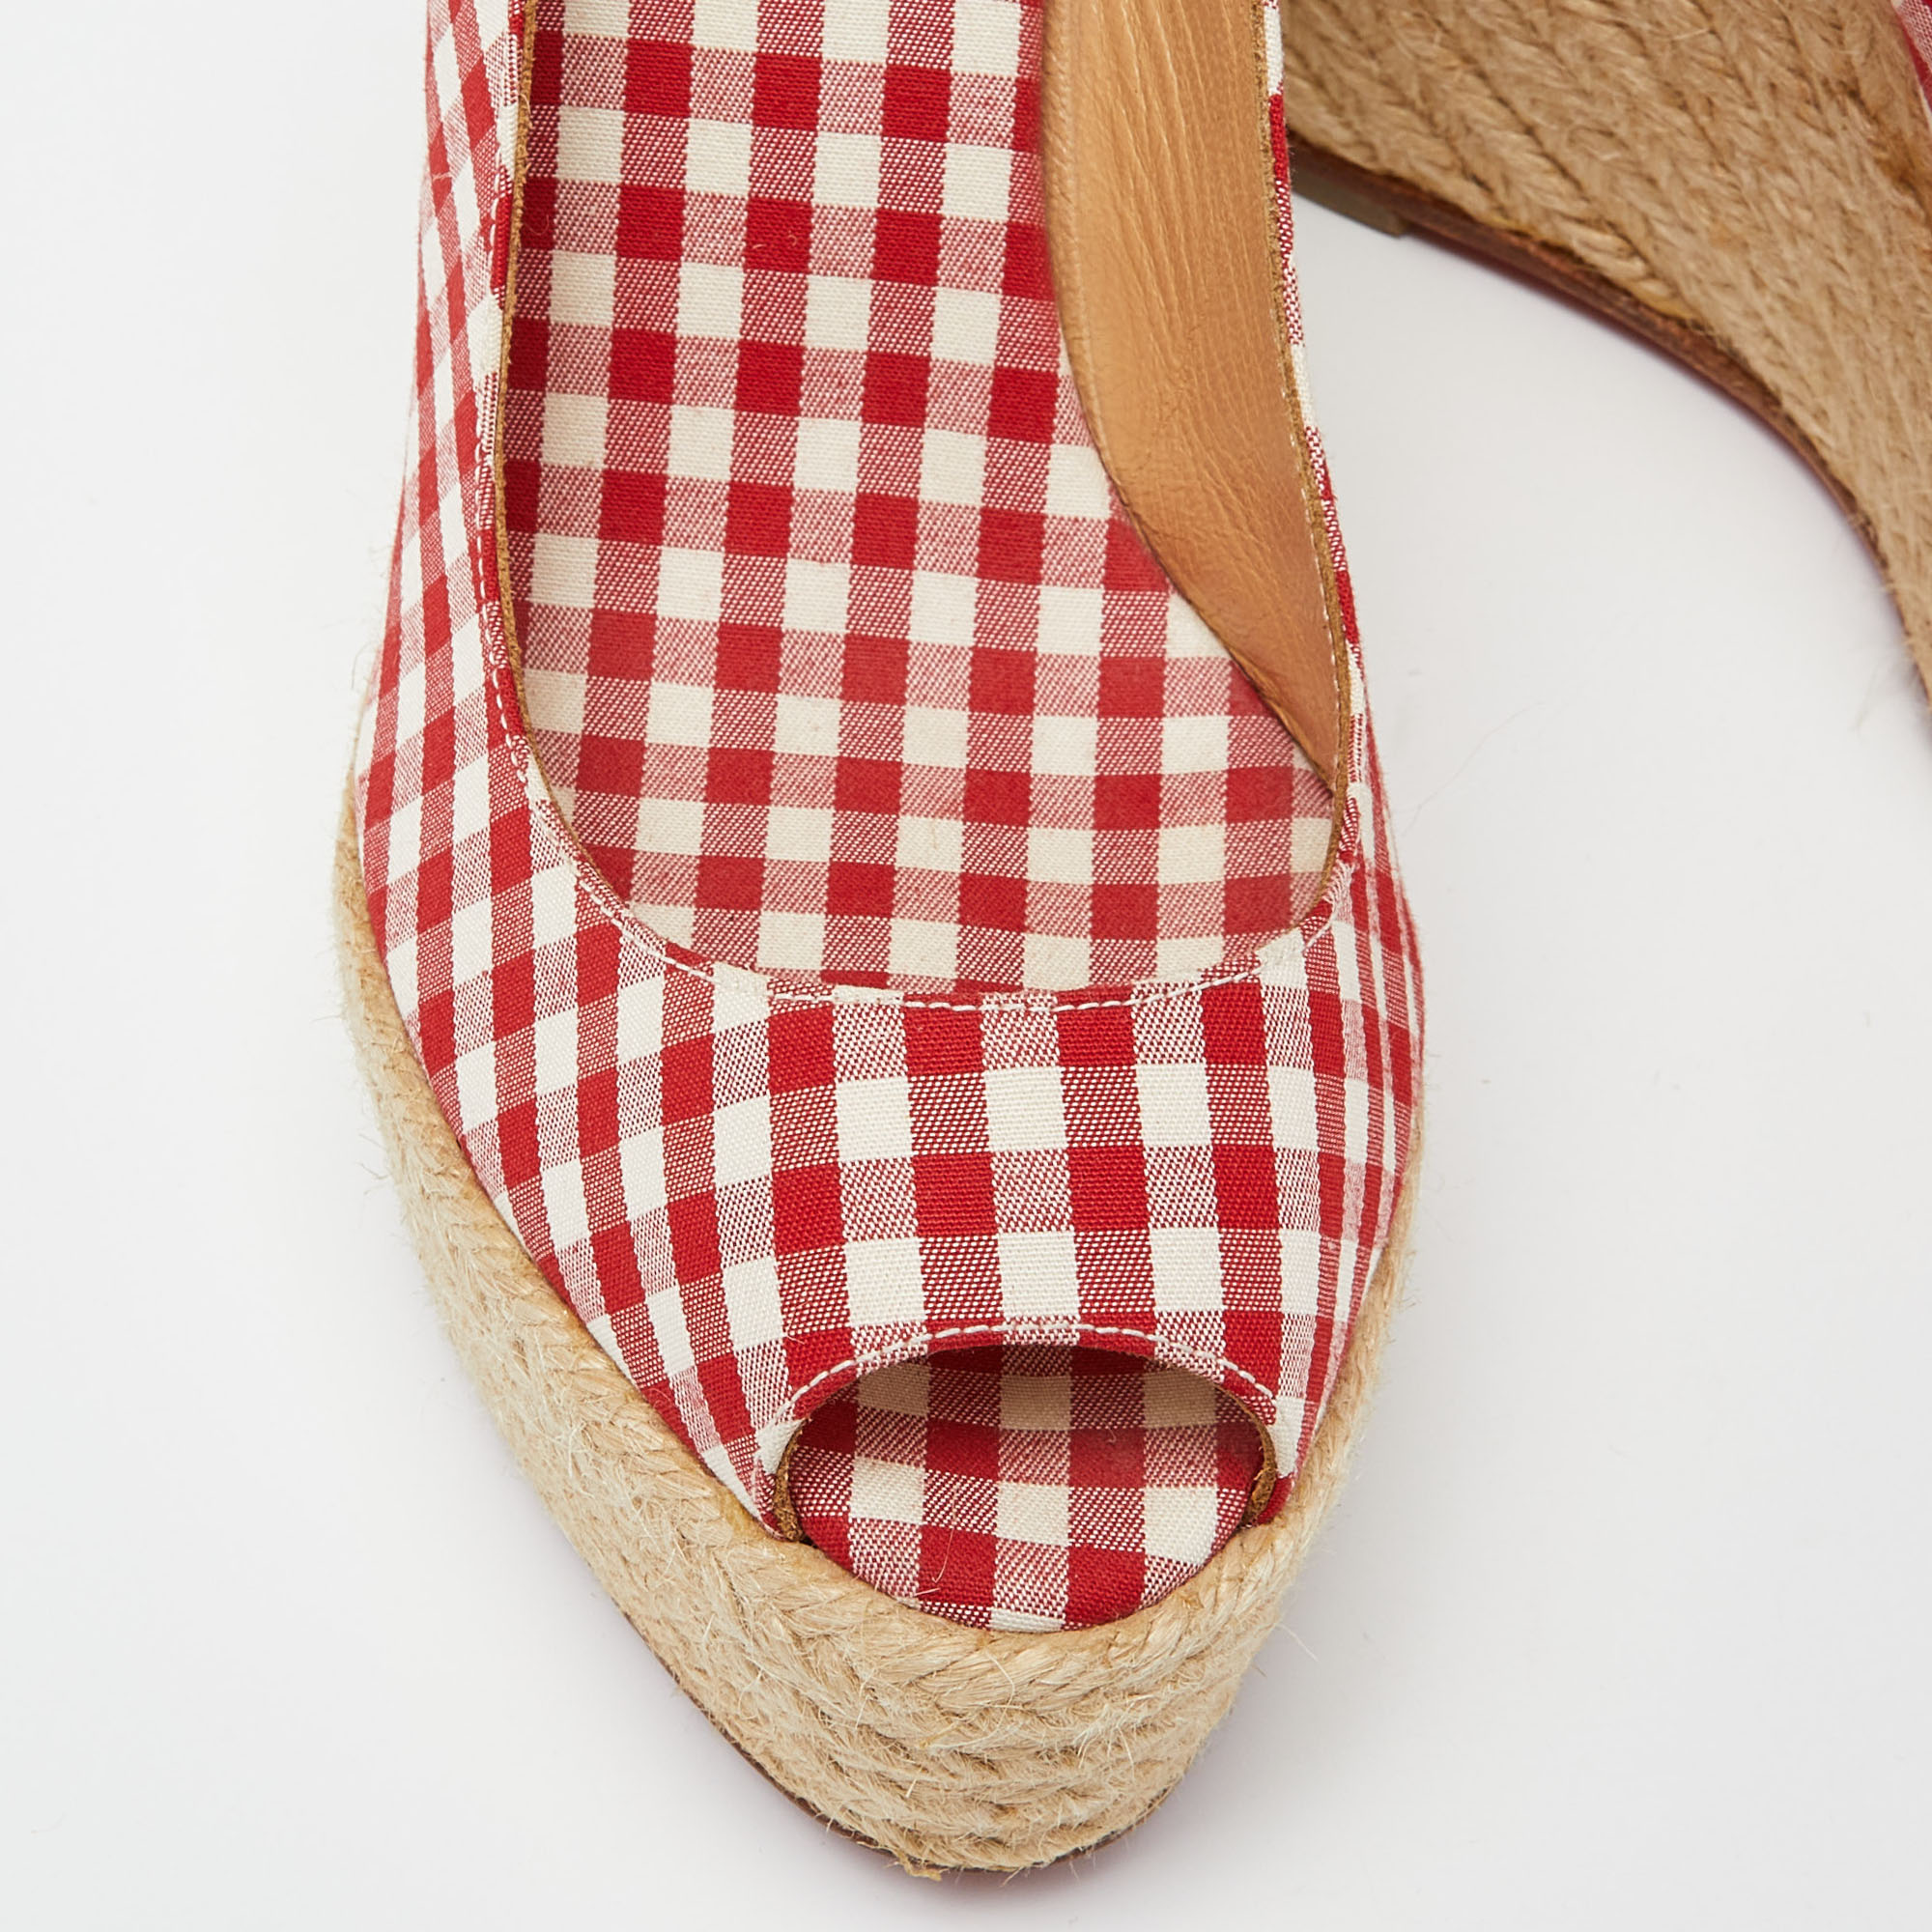 Christian Louboutin Red/White Gingham Fabric Menorca Espadrille Wedge Pumps Size 37